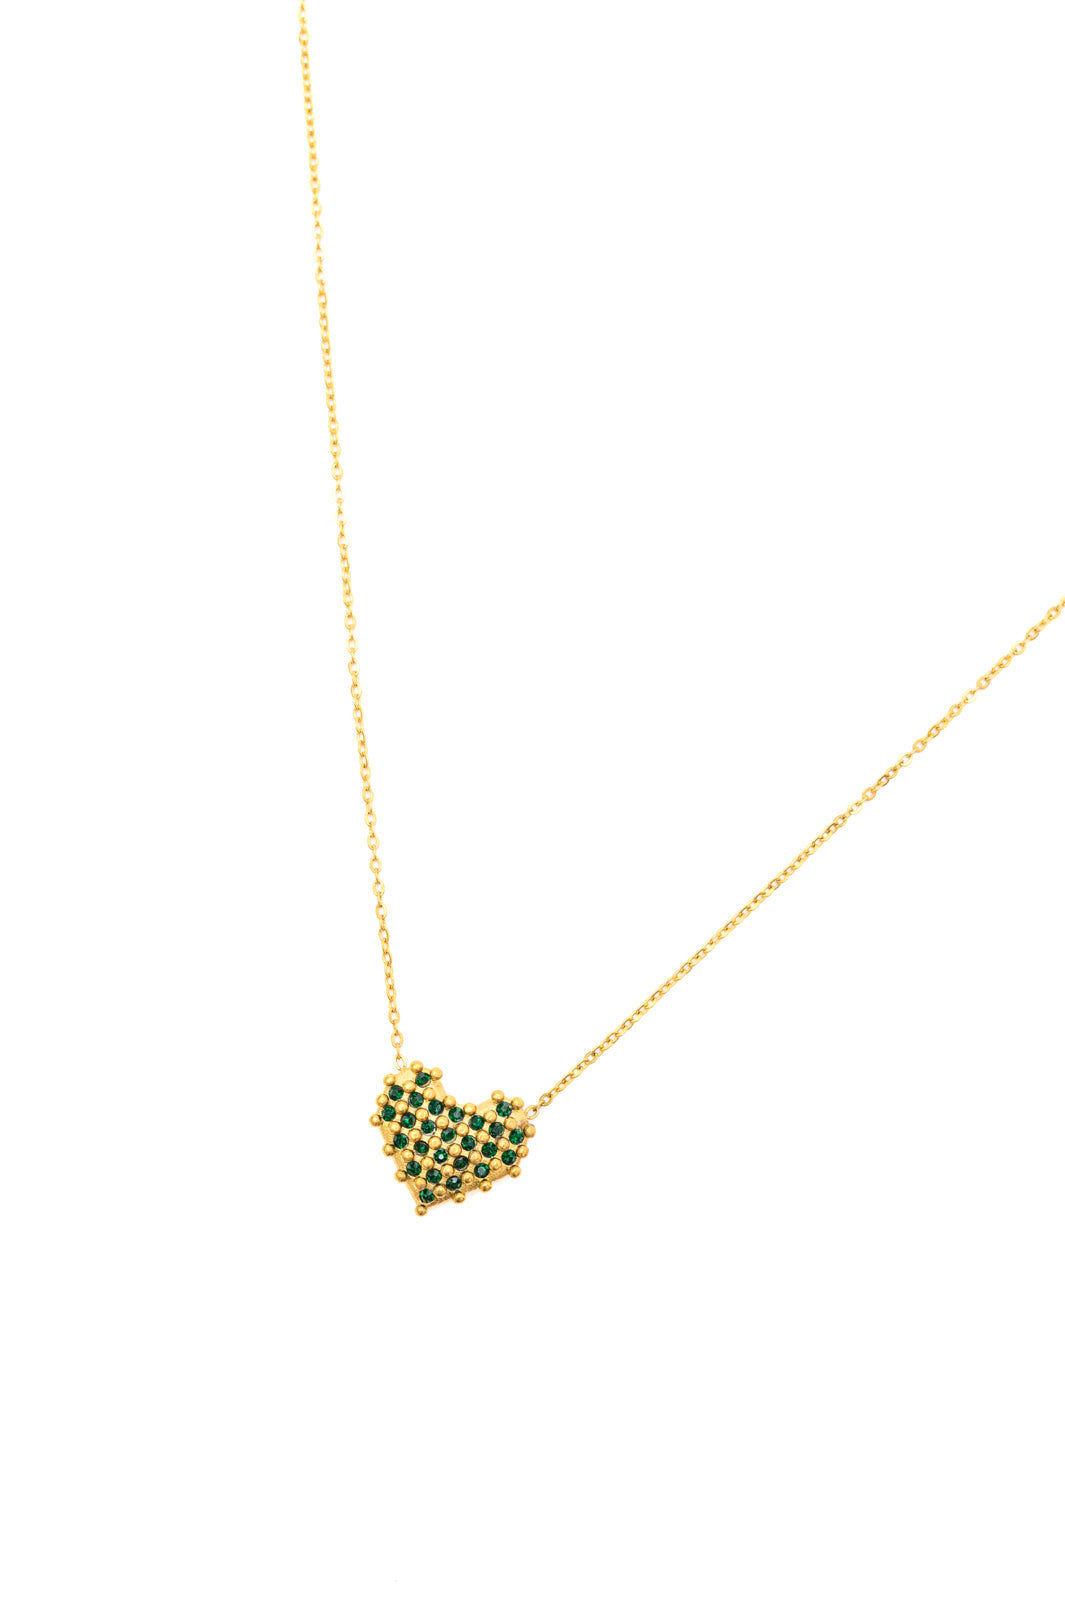 Checkered Heart Necklace